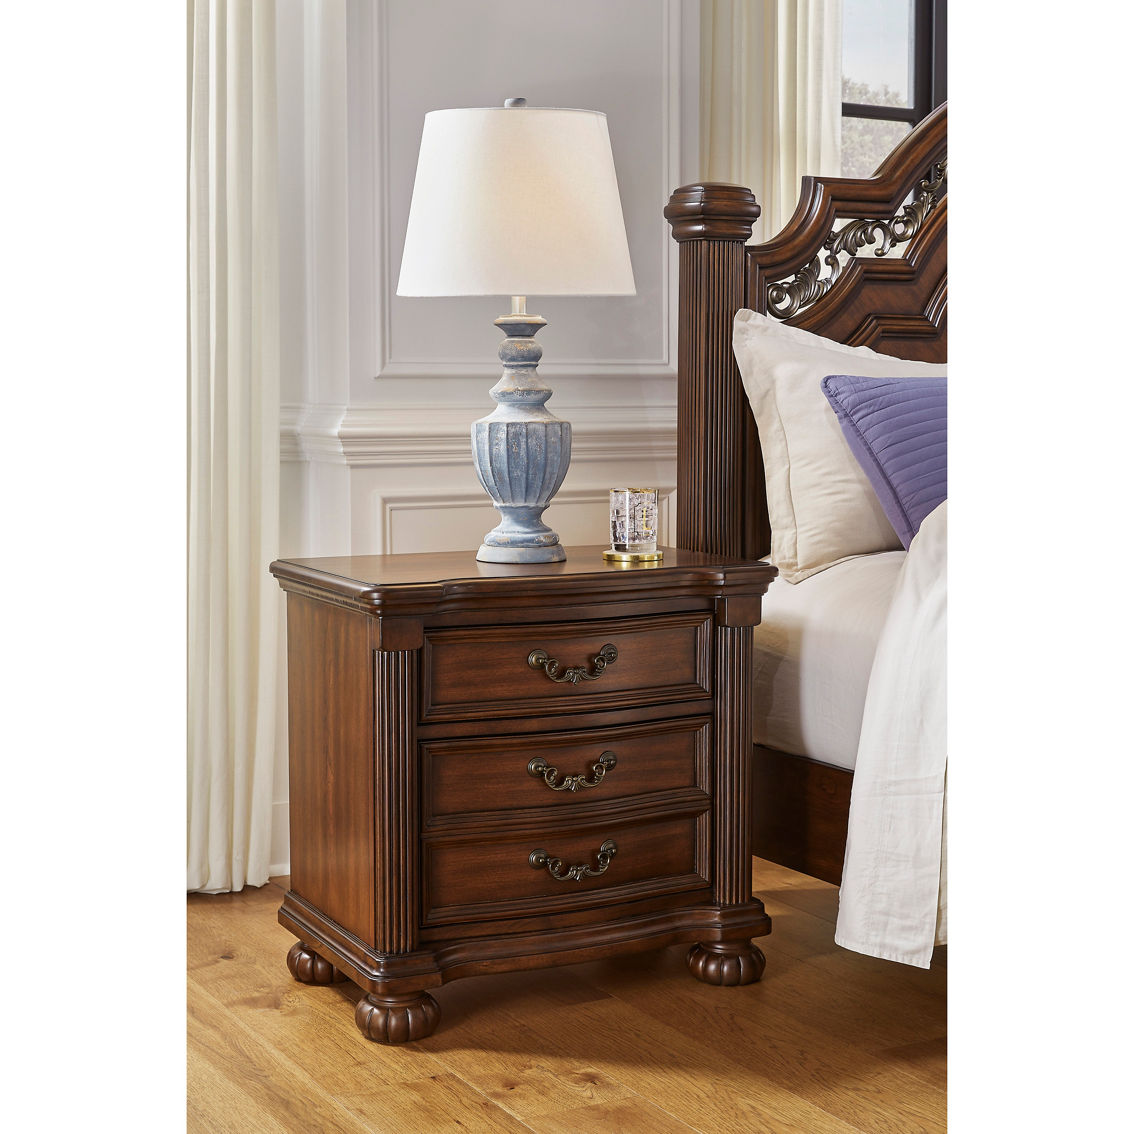 Signature Design by Ashley Lavinton Nightstand - Image 6 of 8